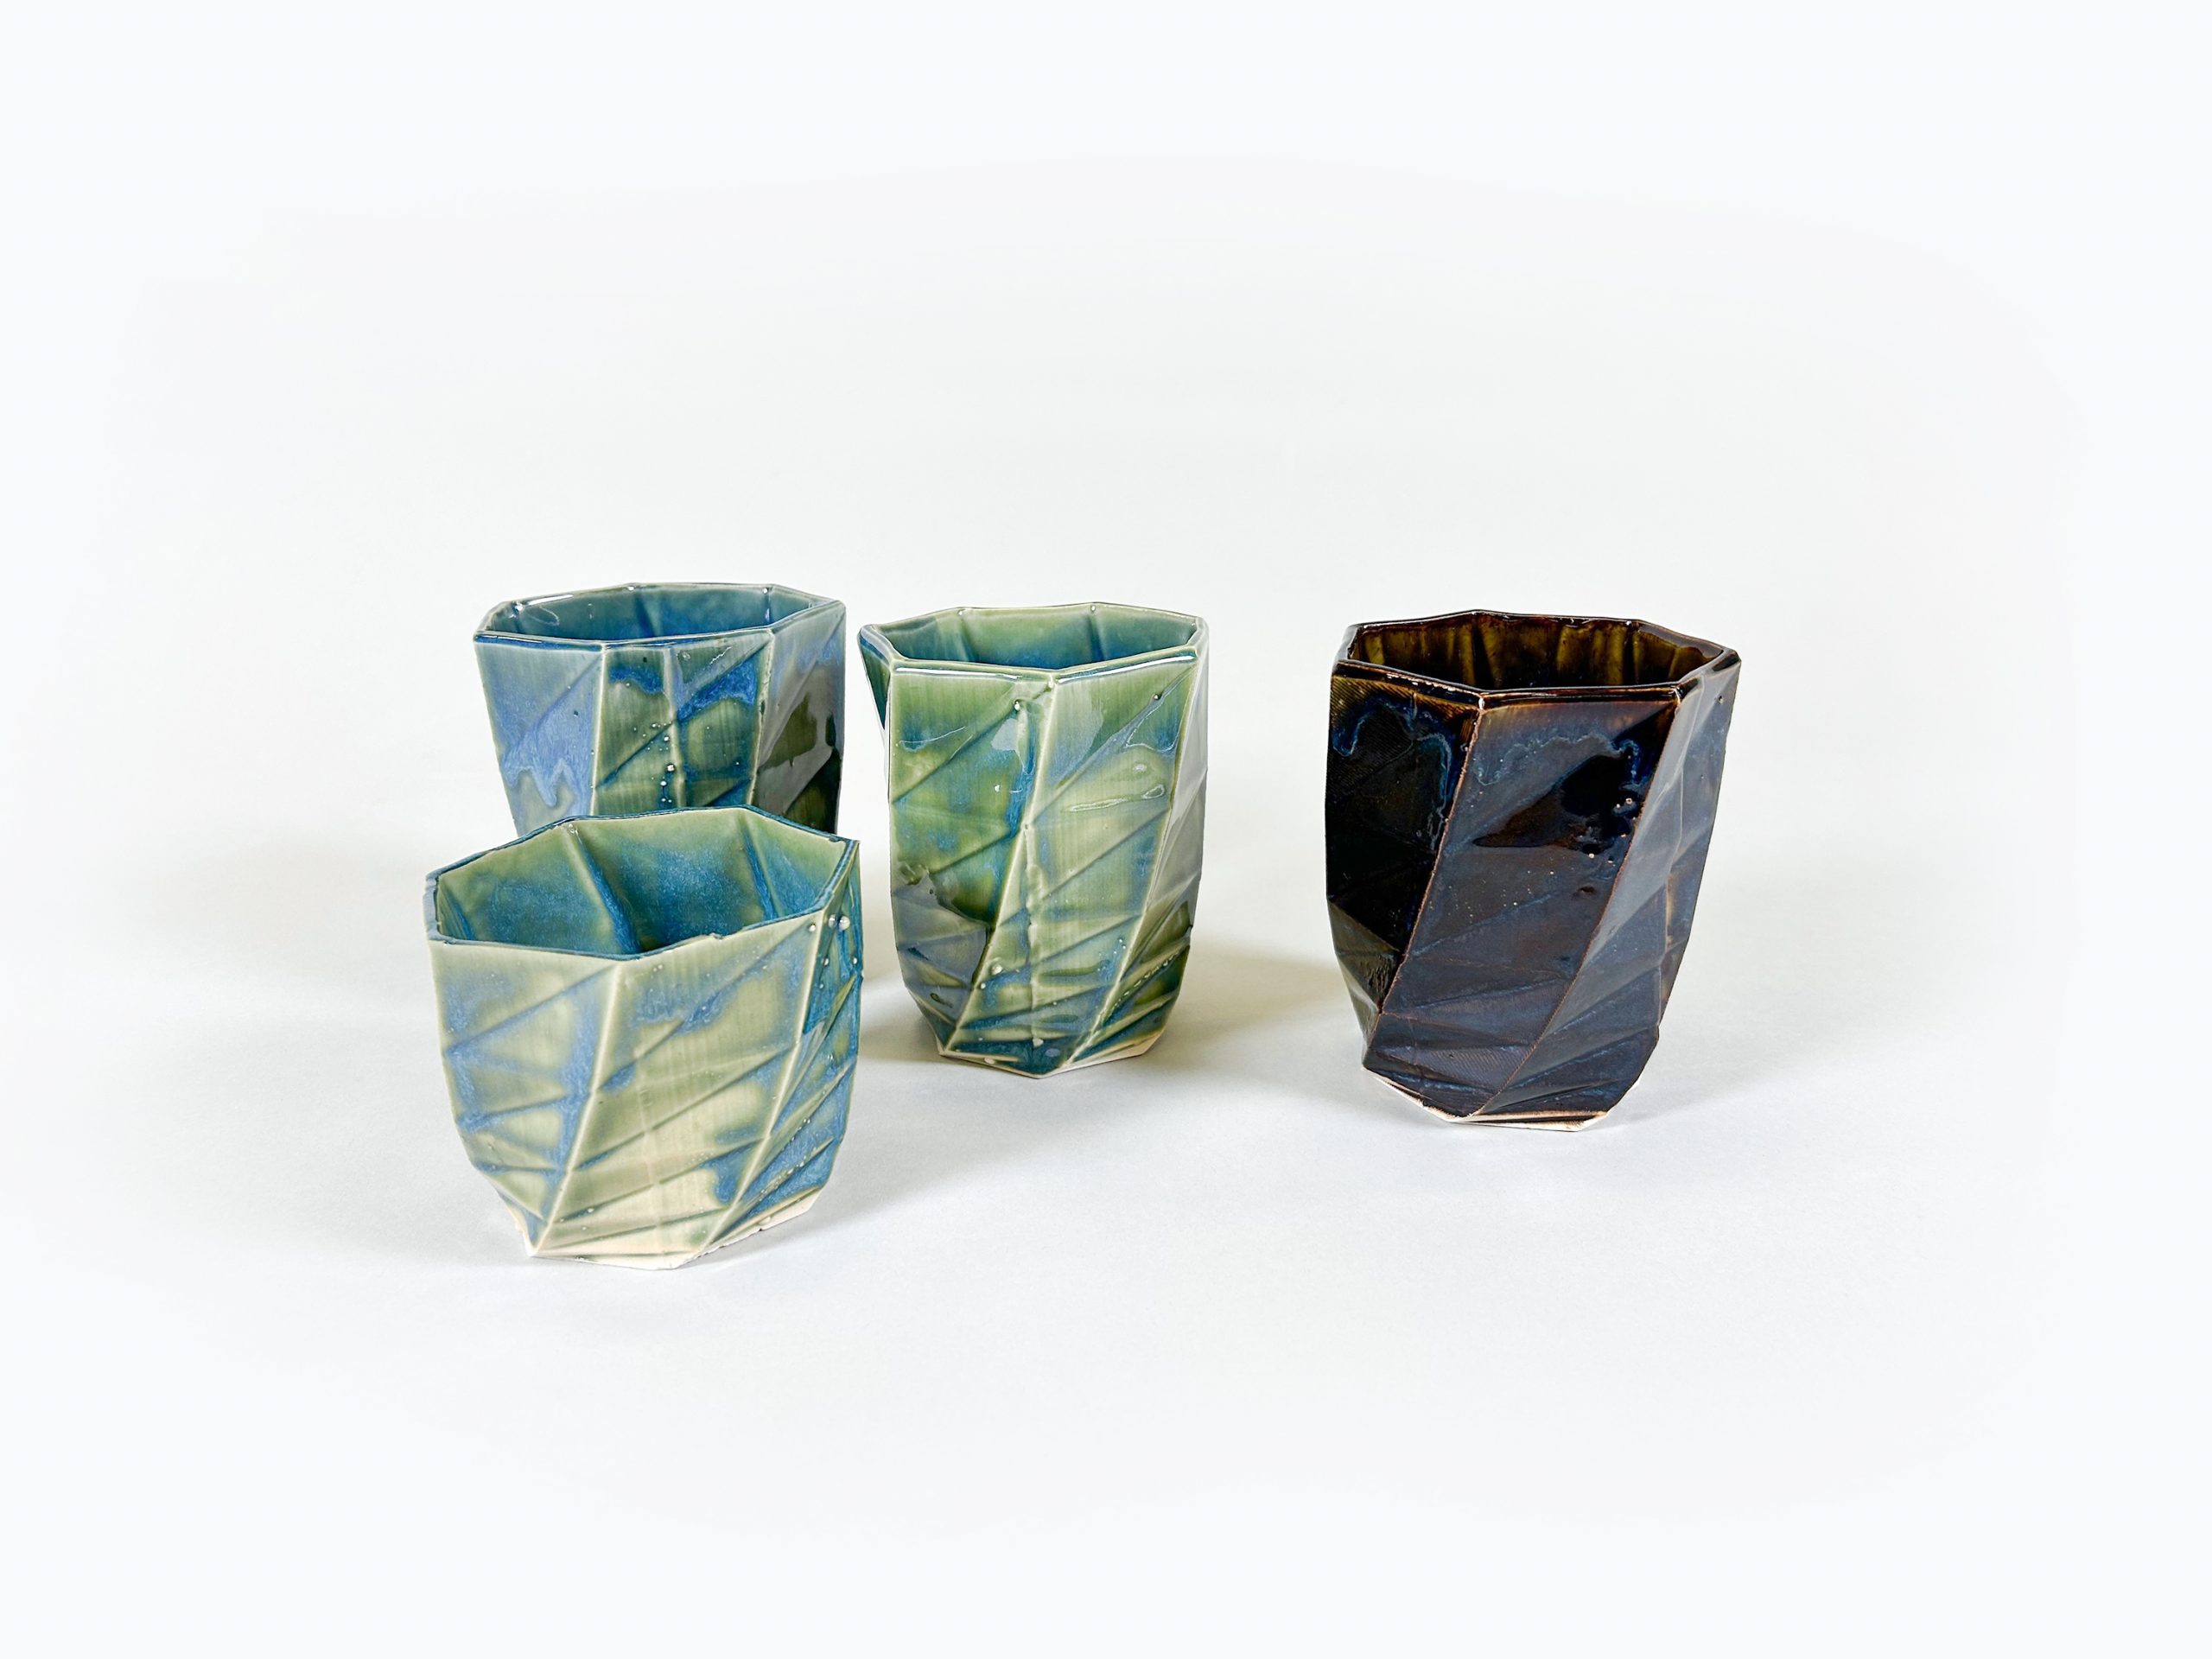 A collection of four porcelain cups created using slip-casing and 3D modeling. One smaller cup sits in the foreground while three taller cups of the same size sit behind it. The rims of the cups are seven-sided polygons which appear to rotate the length of one side as the walls approach the base of the form. Three cups, including two tall cups and the one short cup, are glazed in a translucent green color, with blue crystals forming along the lines of the cups and within certain thicker areas of glaze. The final large cup is a deep cholate brown. On this cup, dark blue crystals creep out from the lines within the cup, turning to white at the edges.